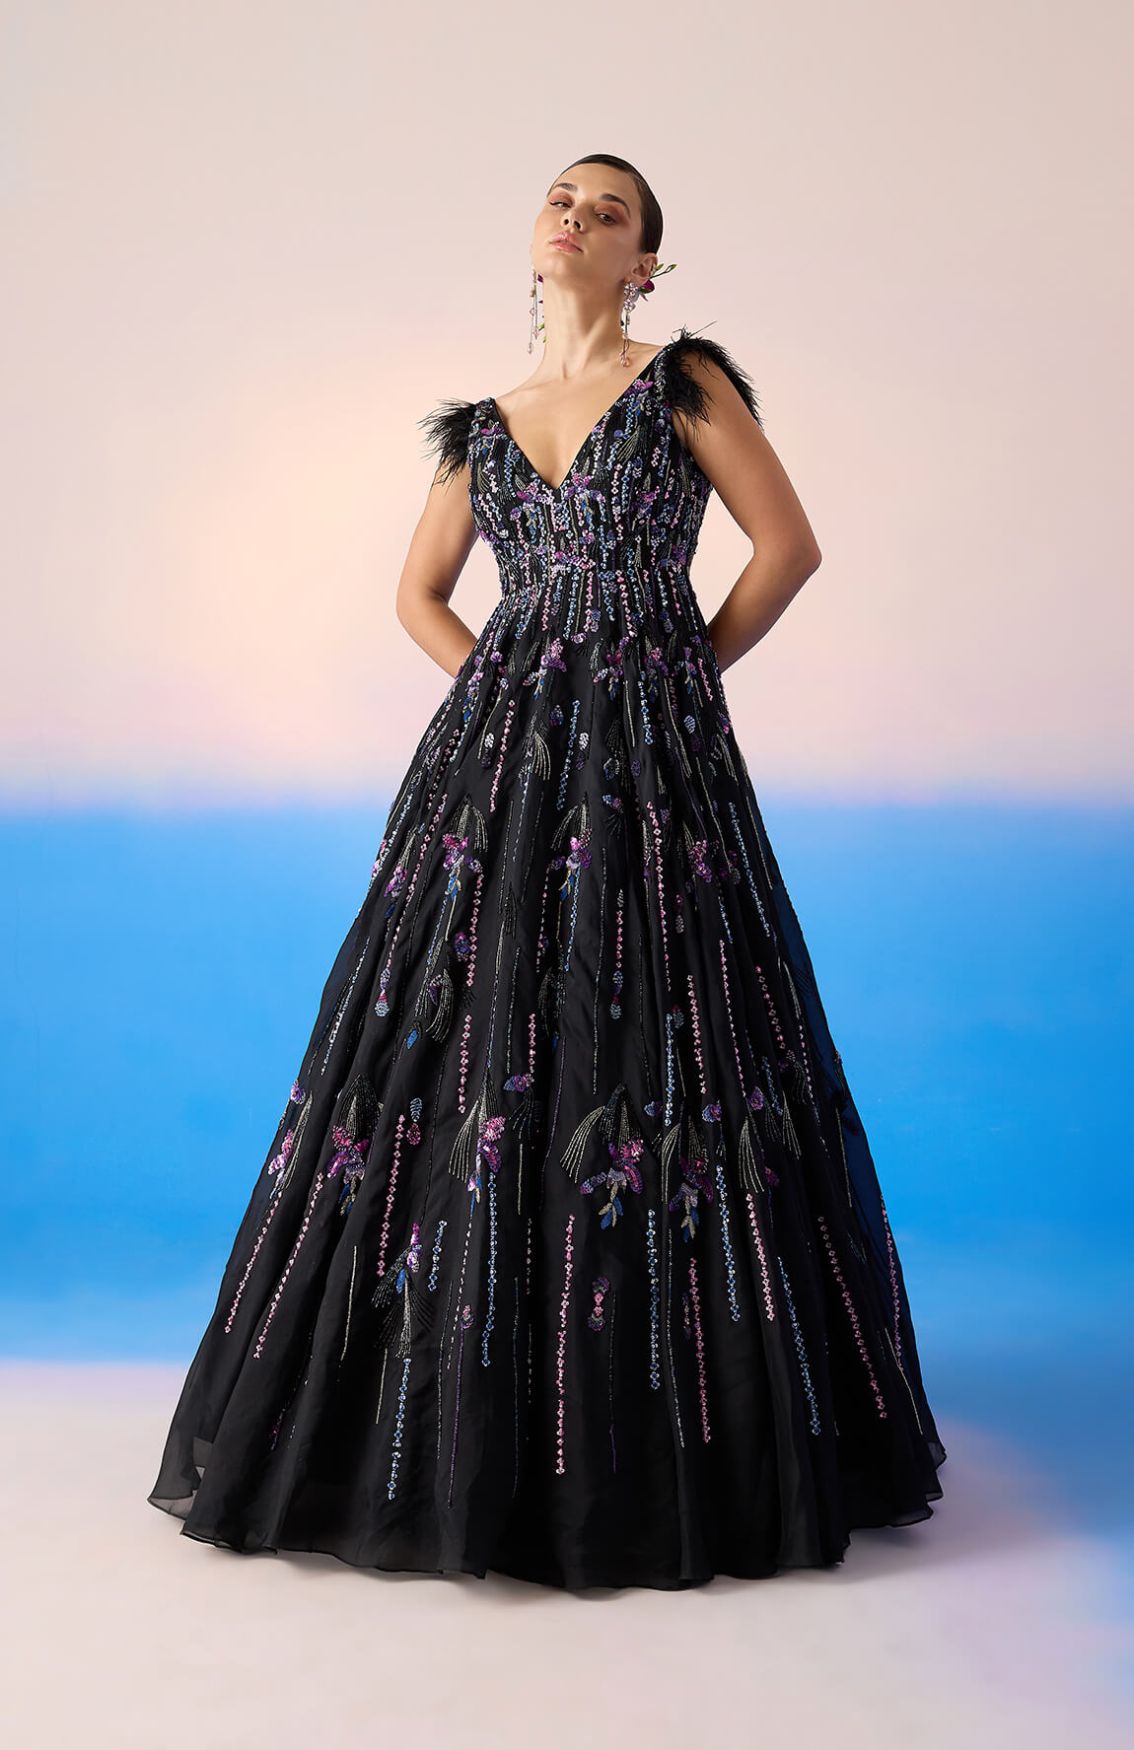 V Neck Embroidered Gown With Feathers On The Shoulder